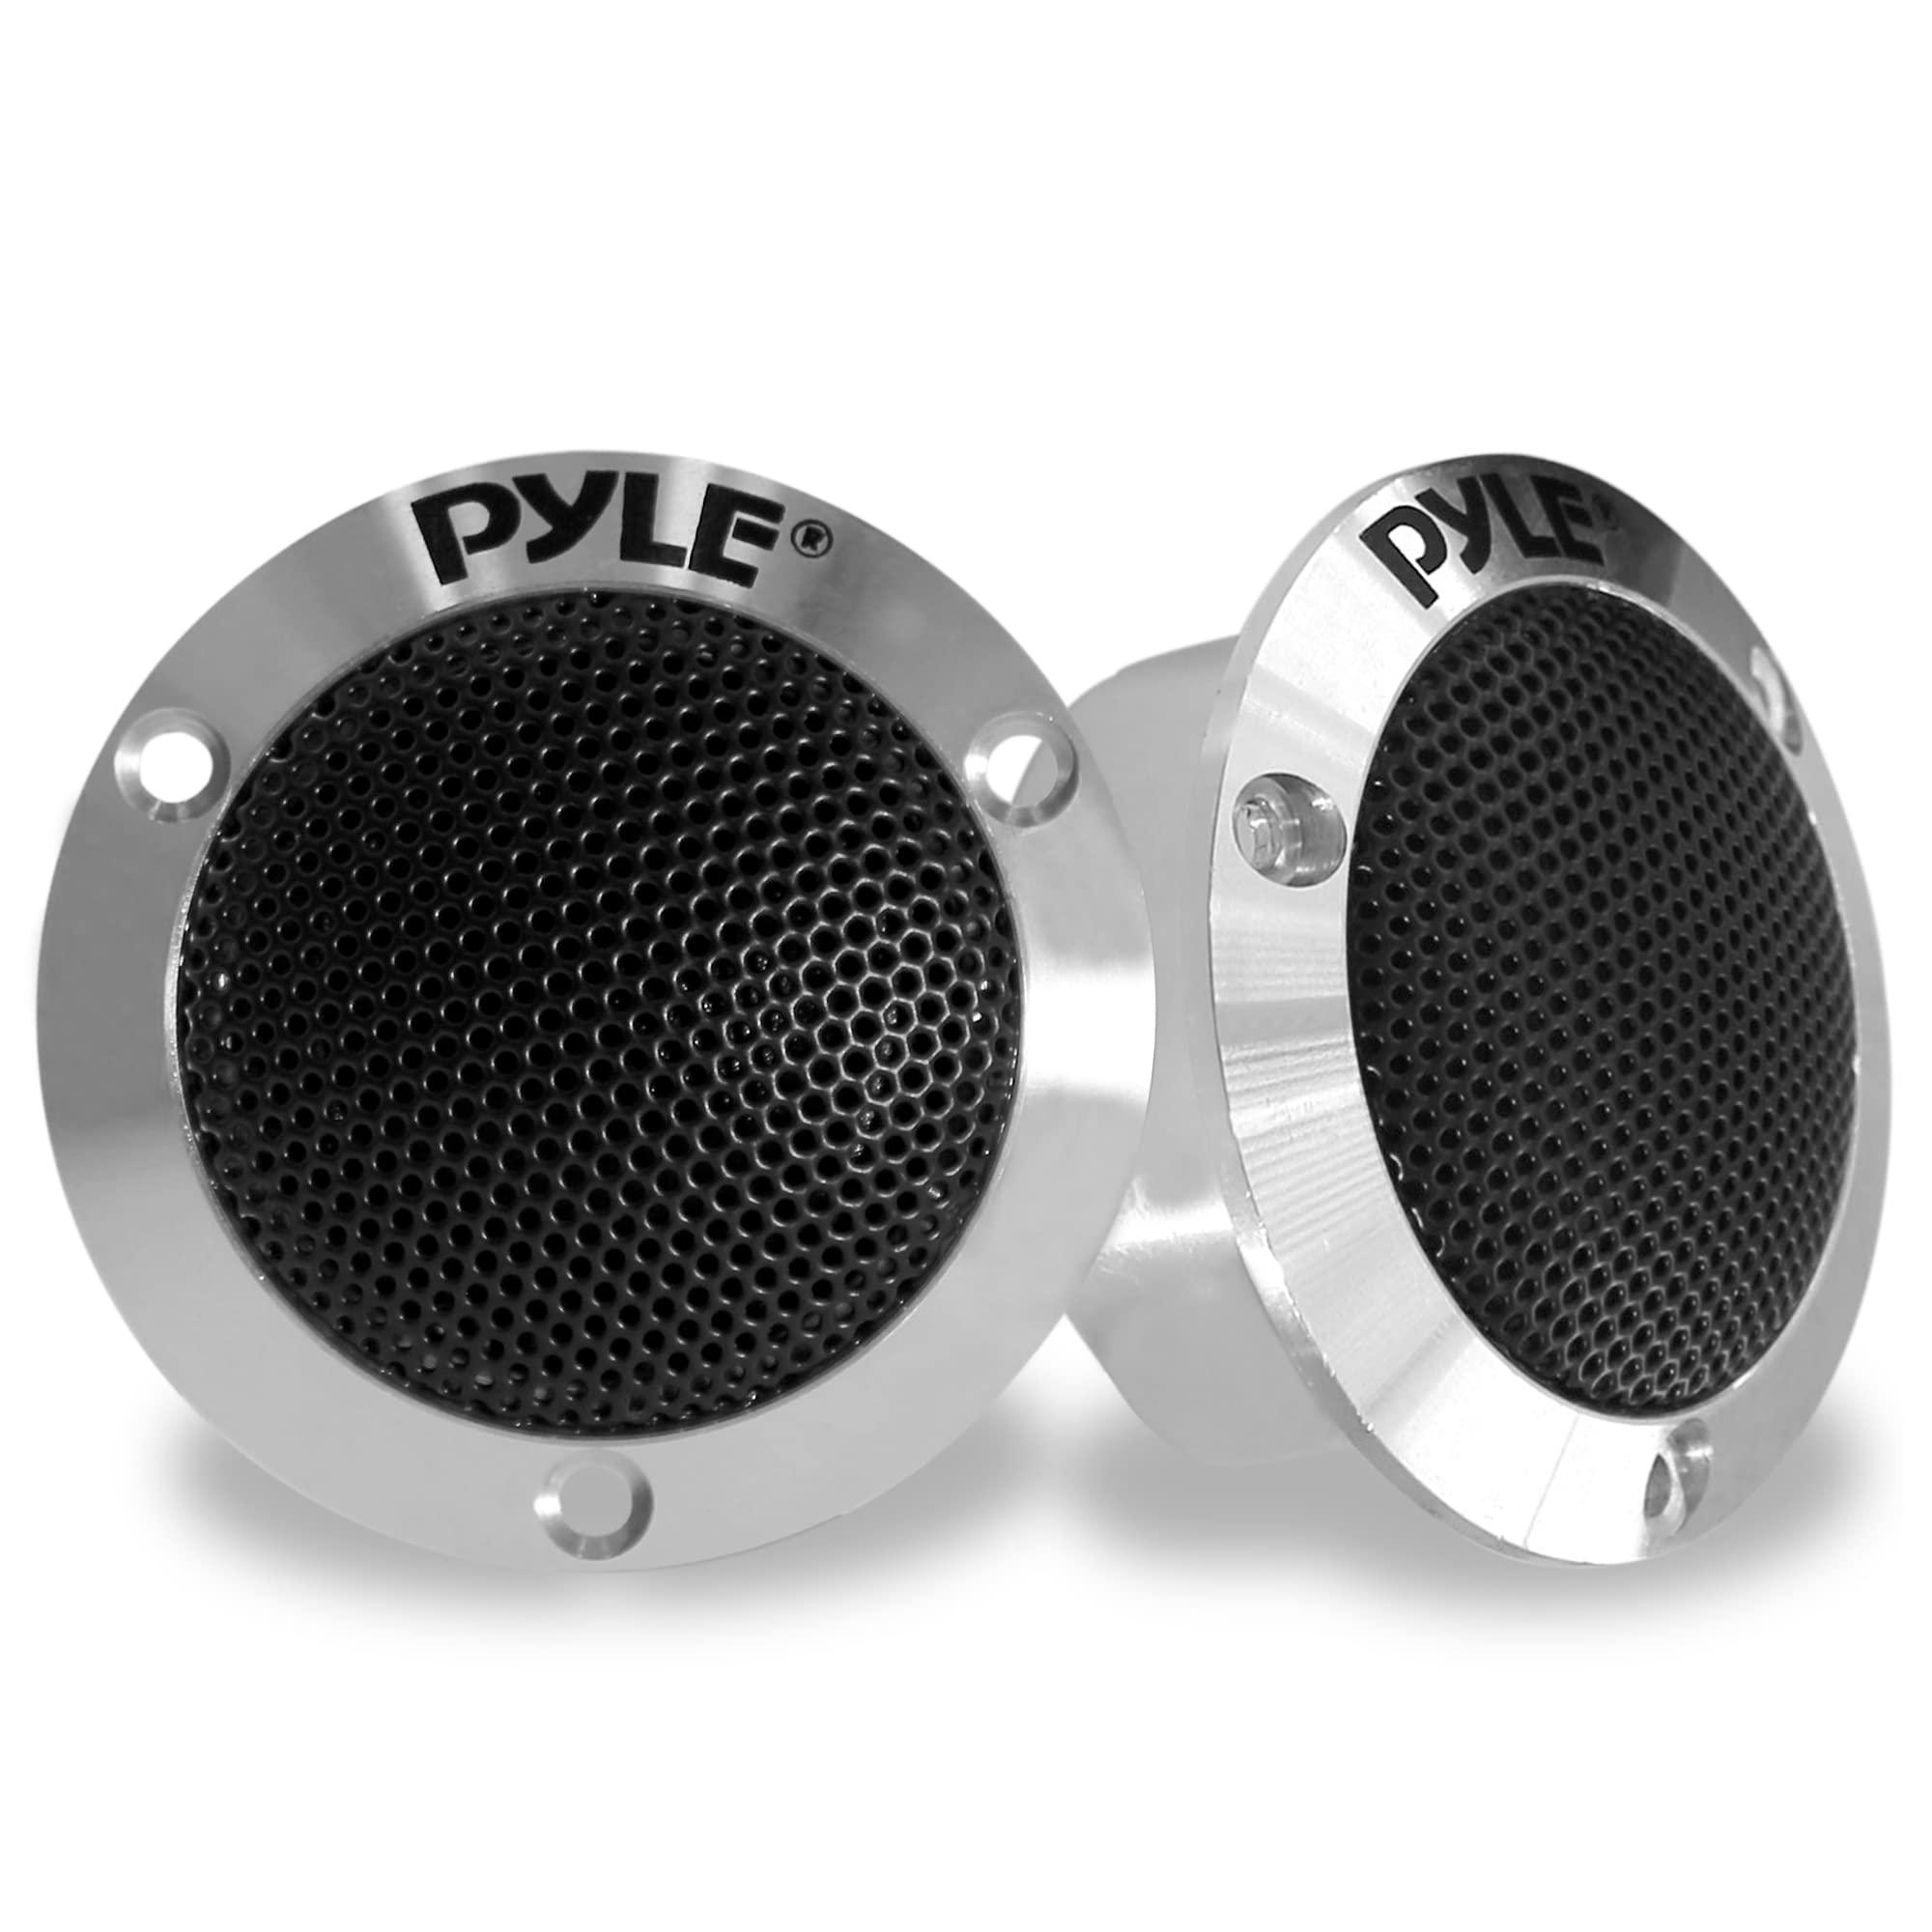 pyle 2.5" dual titanium dome tweeters - 1 pair 1 voice coil 80 watts at 4-ohm, car audio tweeters for speakers with aluminum 